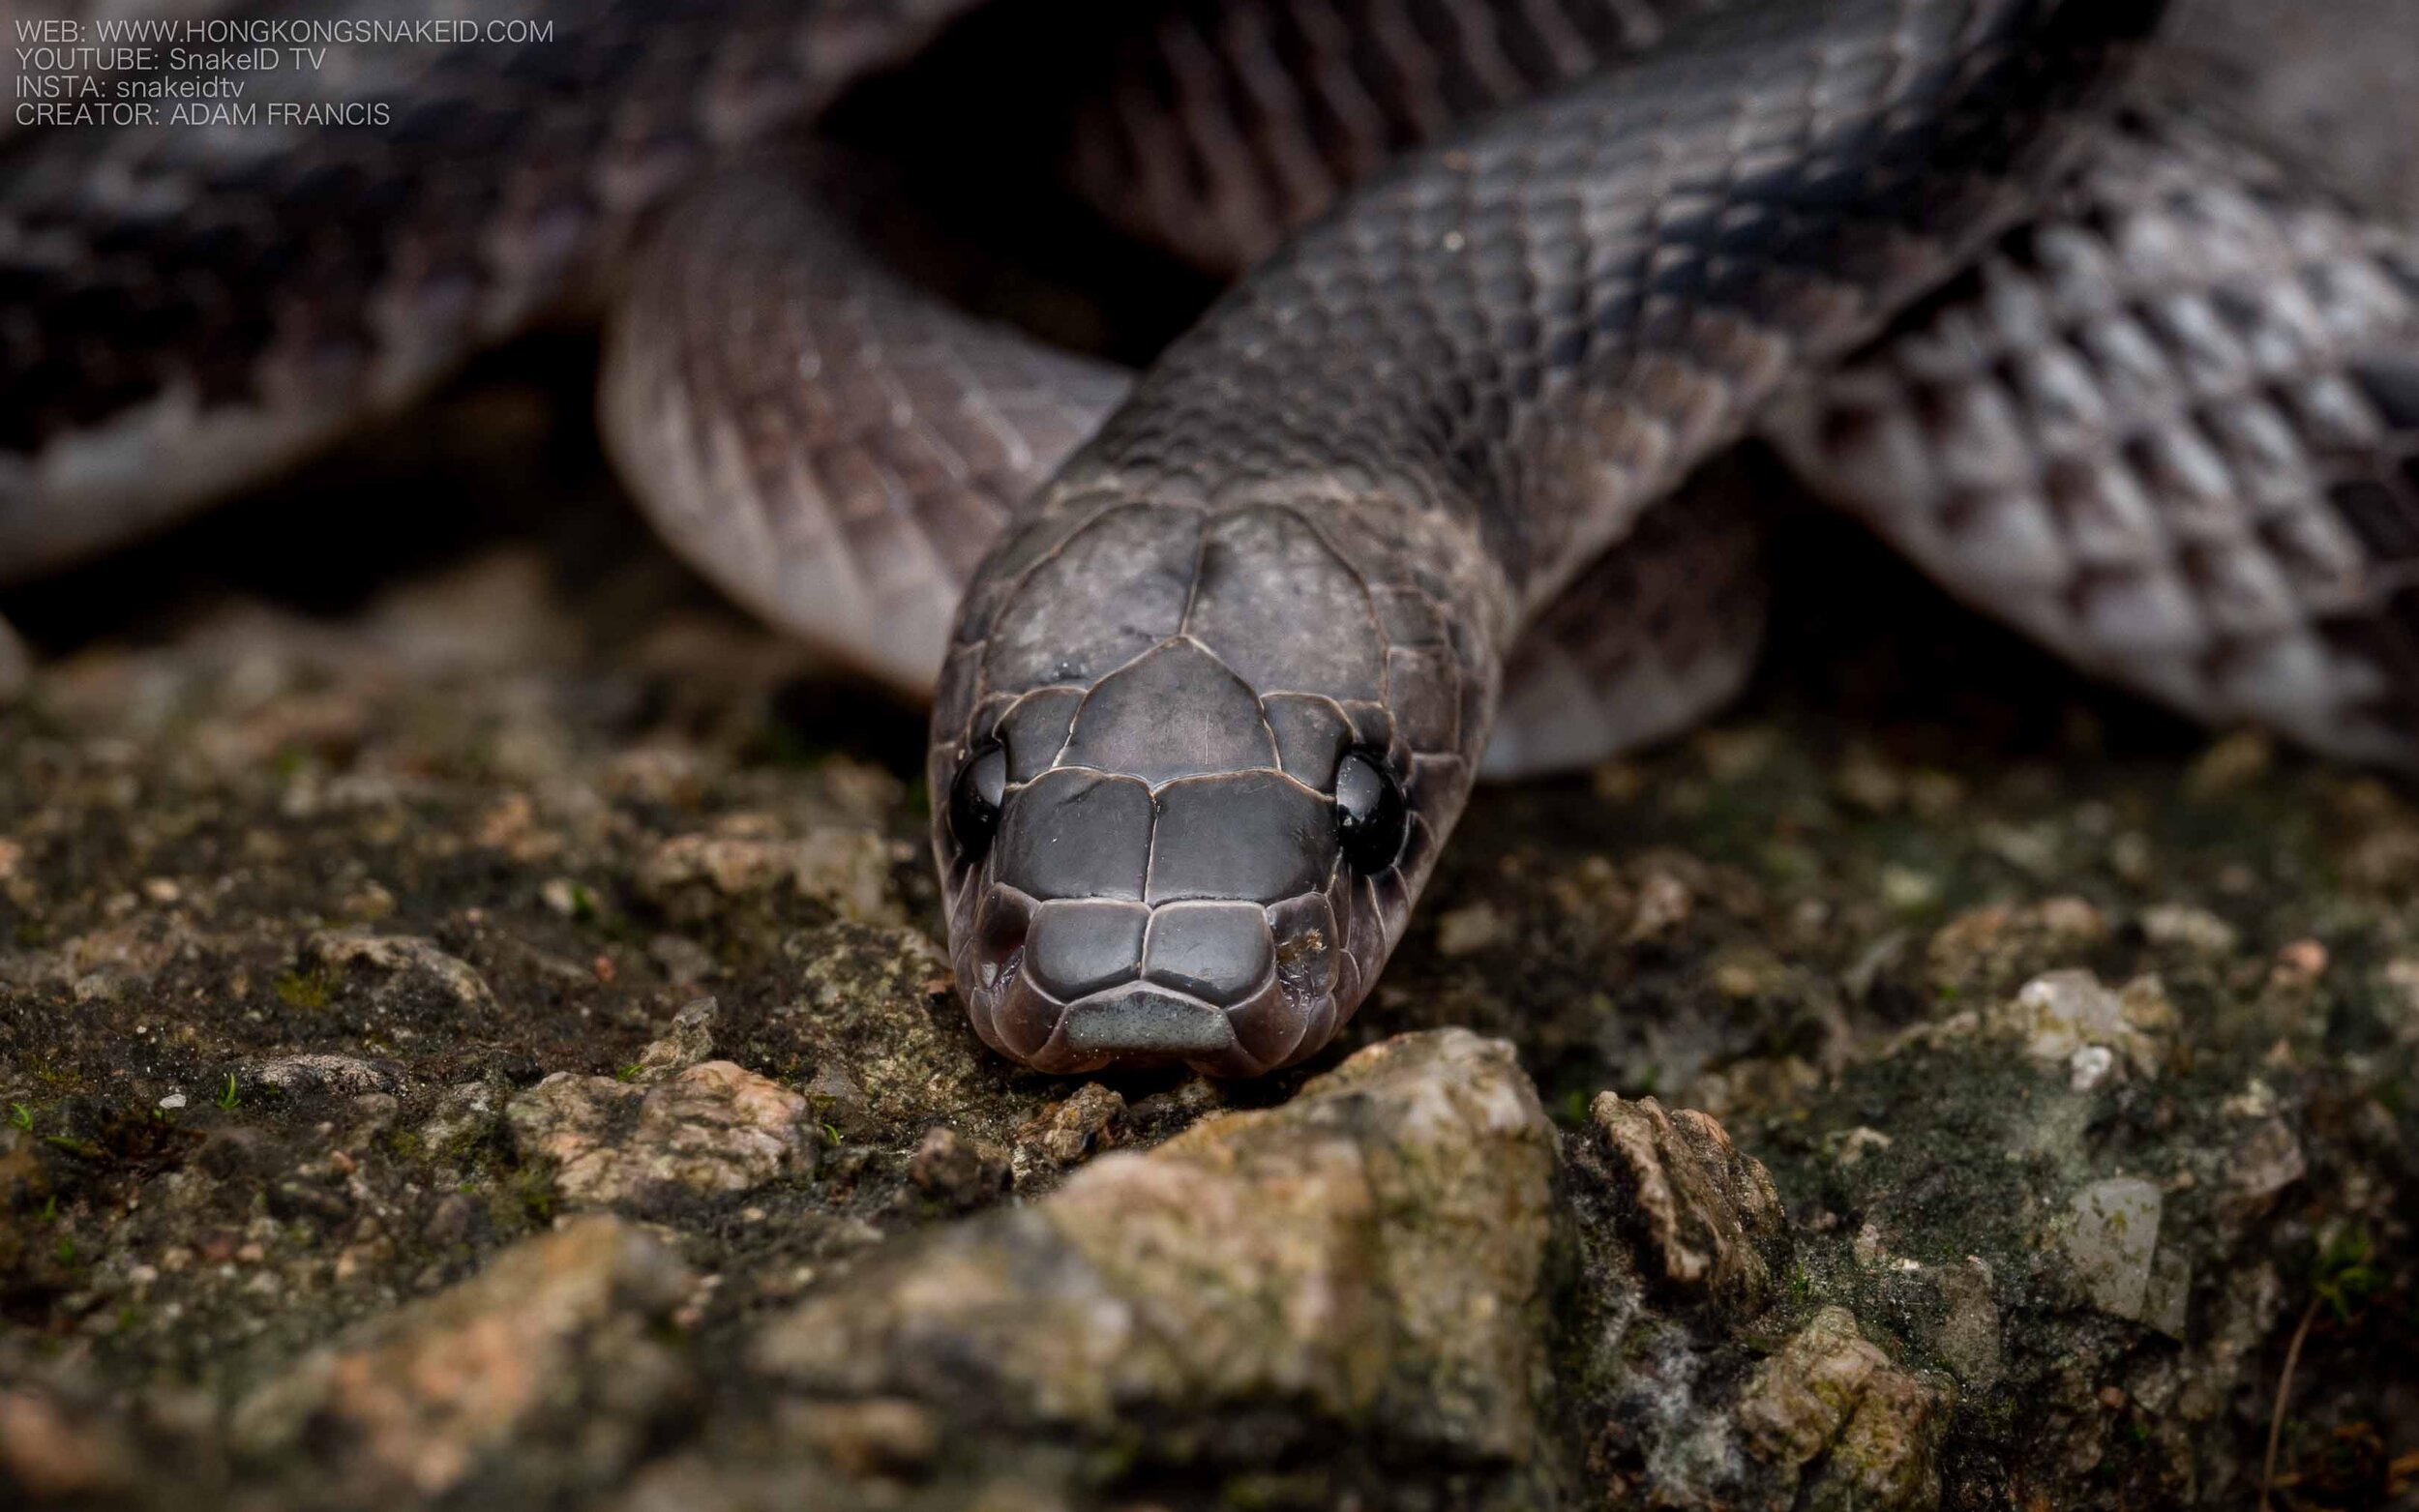 Banded Wolf Snake - Lycodon subcinctus